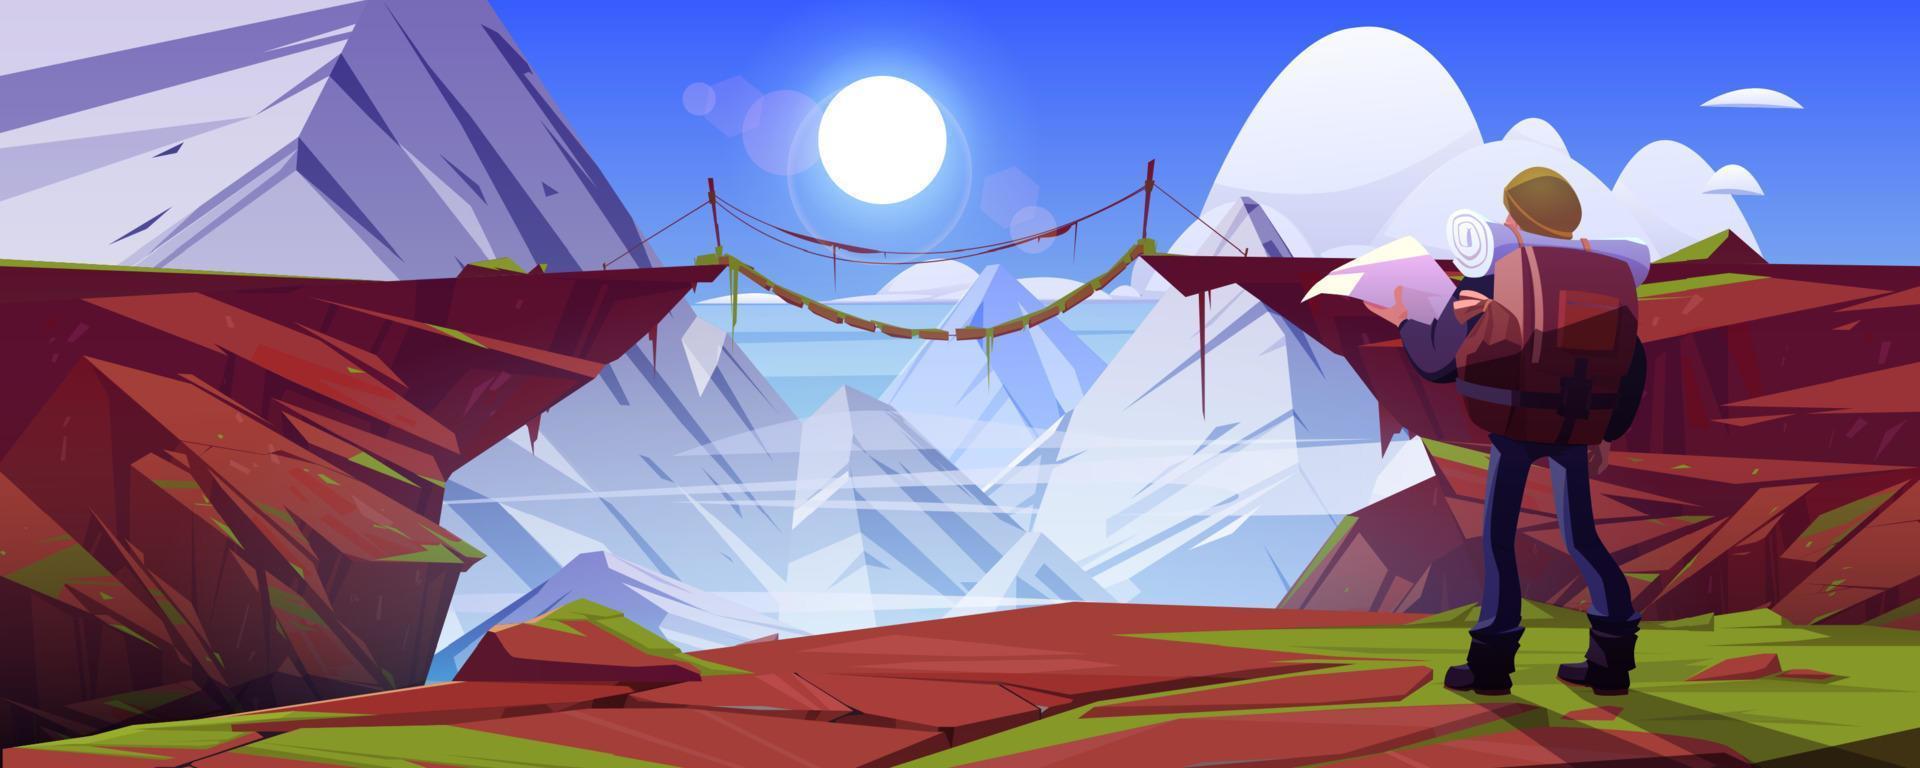 Mountain landscape with hiker man and bridge vector